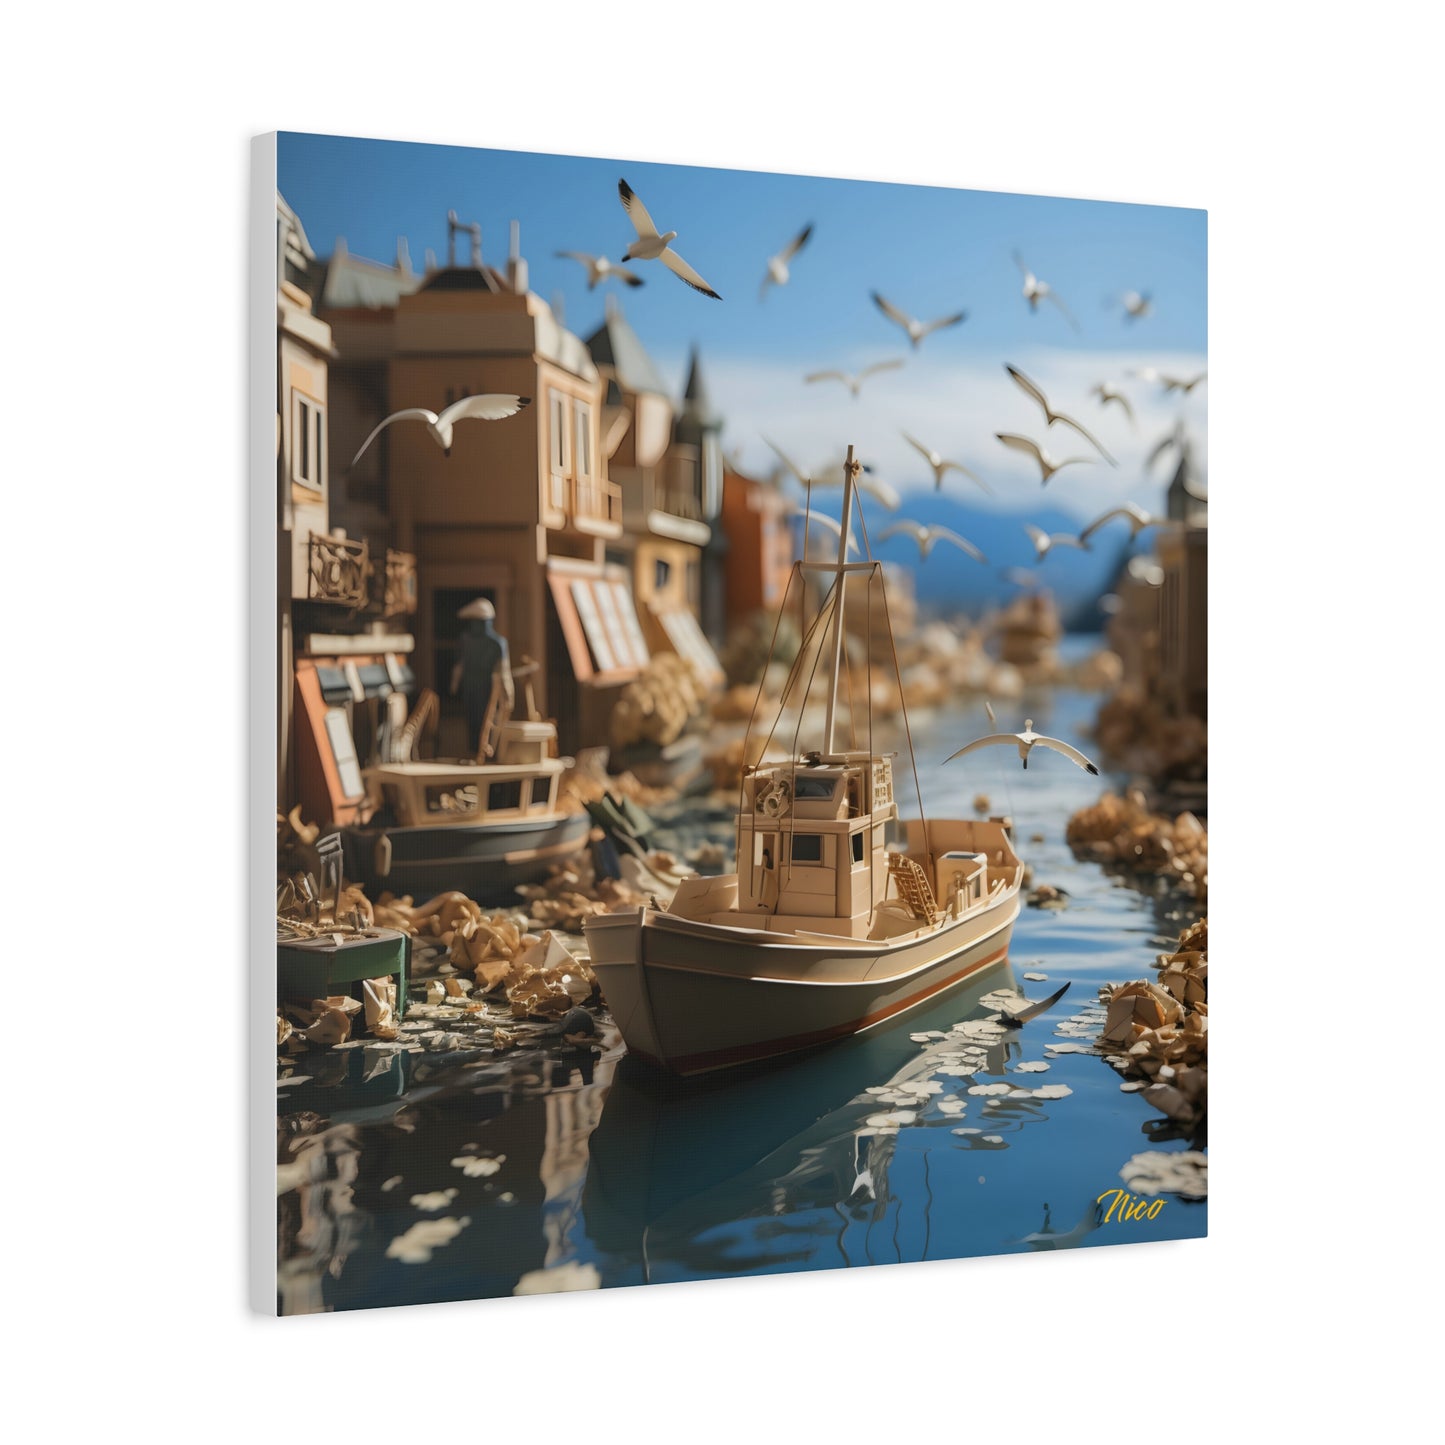 On The Docks By The Bay Series Print #3 - Streched Matte Canvas Print, 1.25" Thick